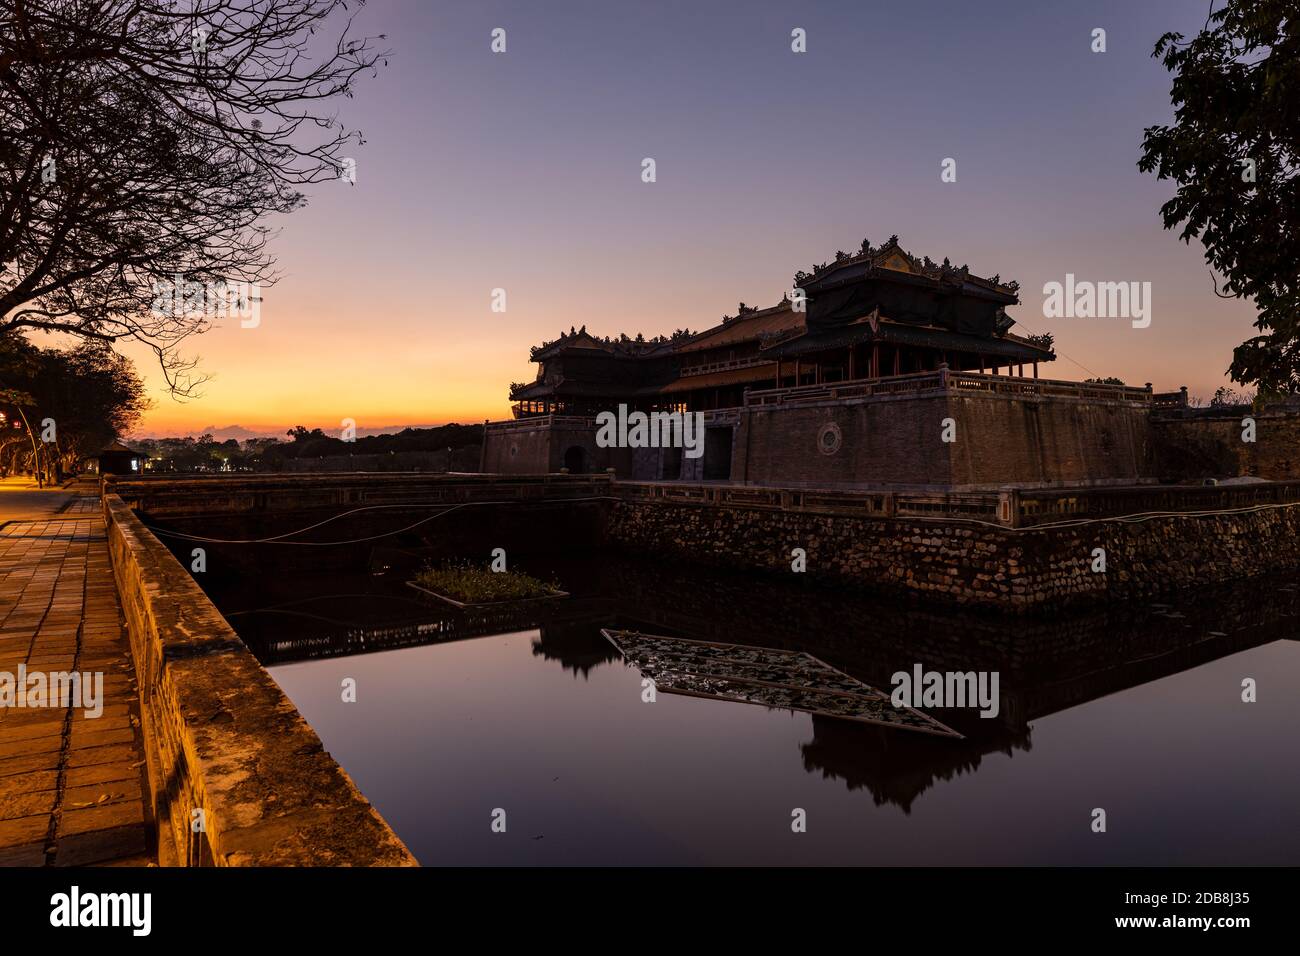 The Imperial Palace of Hue in Vietnam Stock Photo